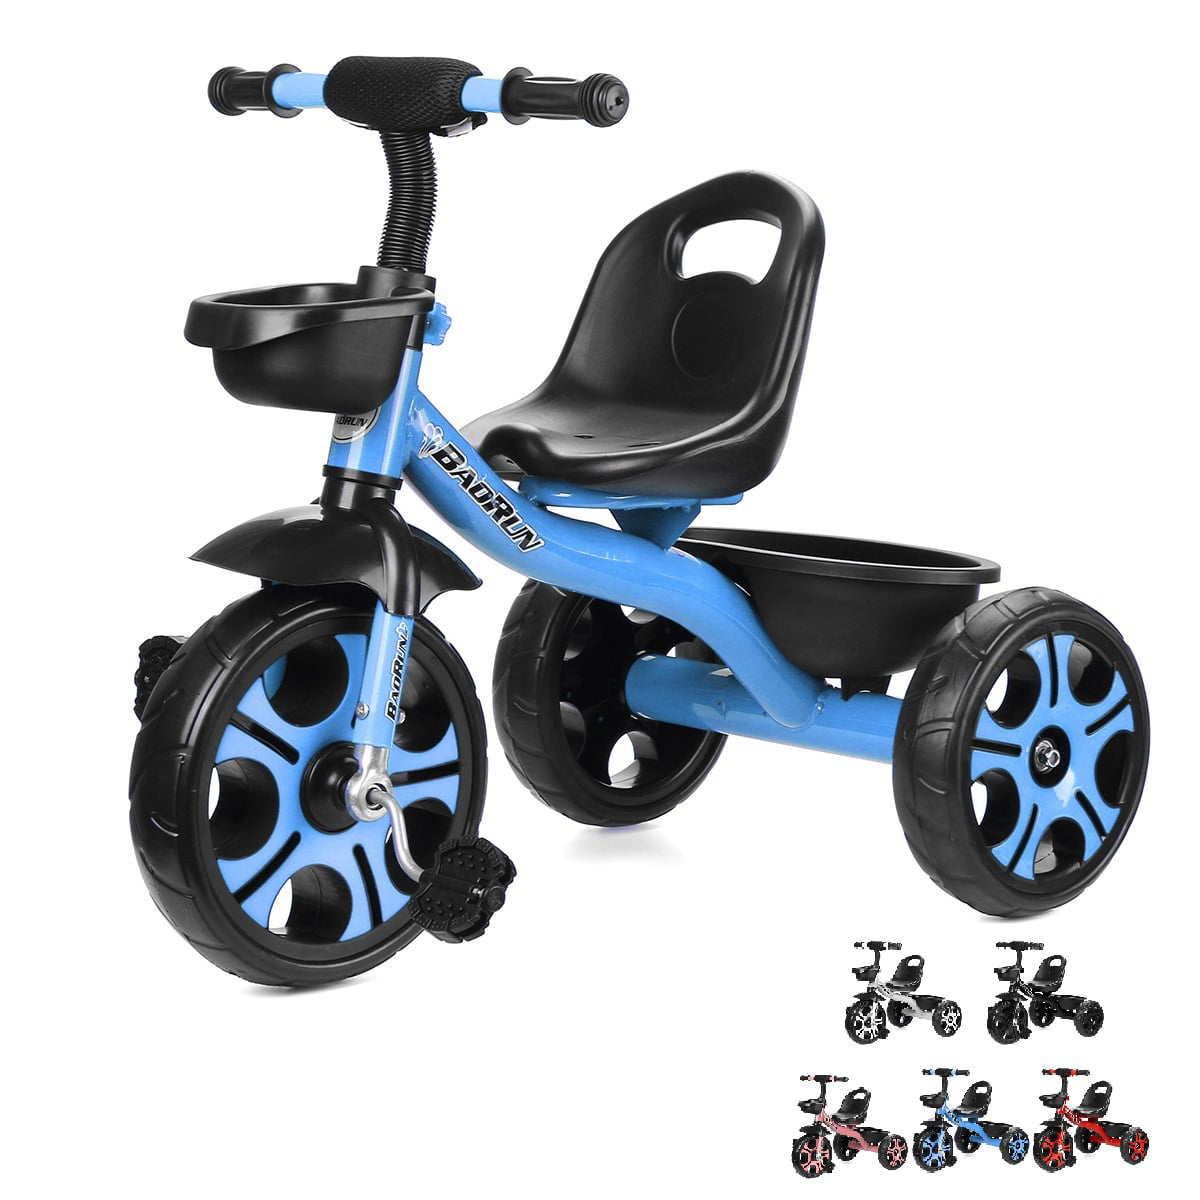 1-6 Year Old Baby Push Pedal Bike Childrens Tricycle Foldable Foot Pedal Seat Can Be Adjusted Front and Back Kindergarten Stroller